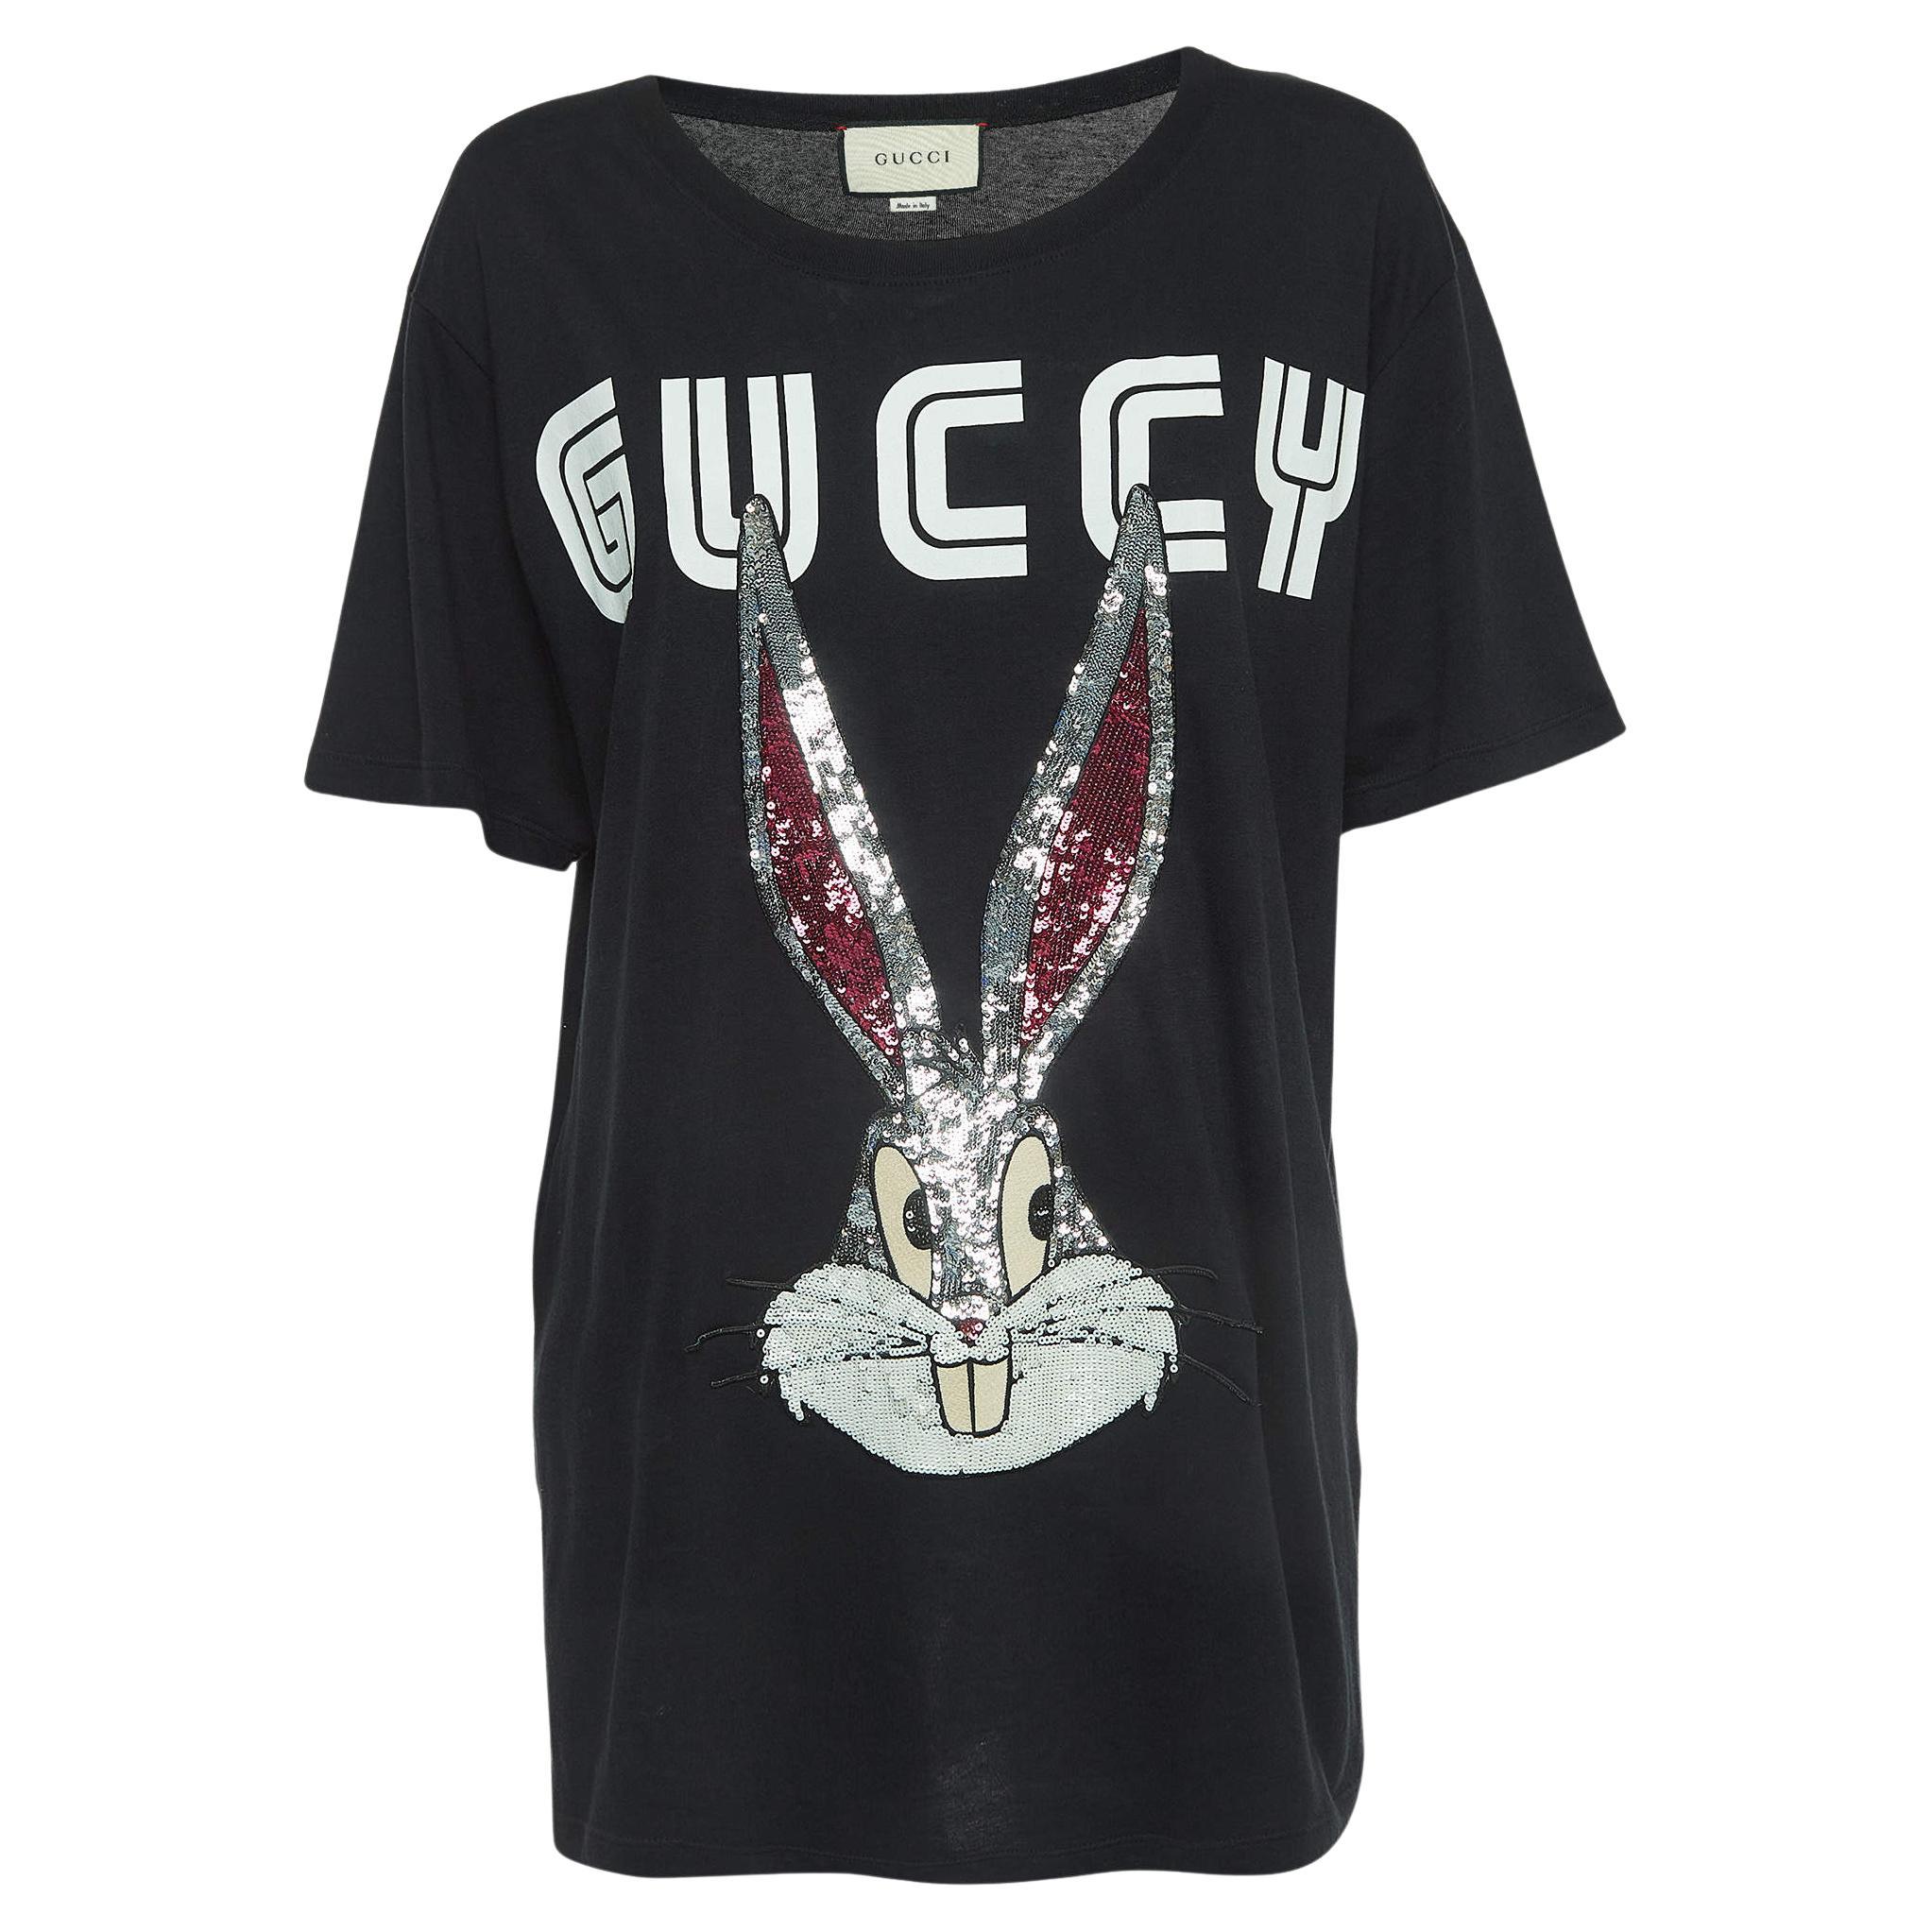 Gucci Black Embellished Bugs Bunny Cotton T-Shirt M For Sale